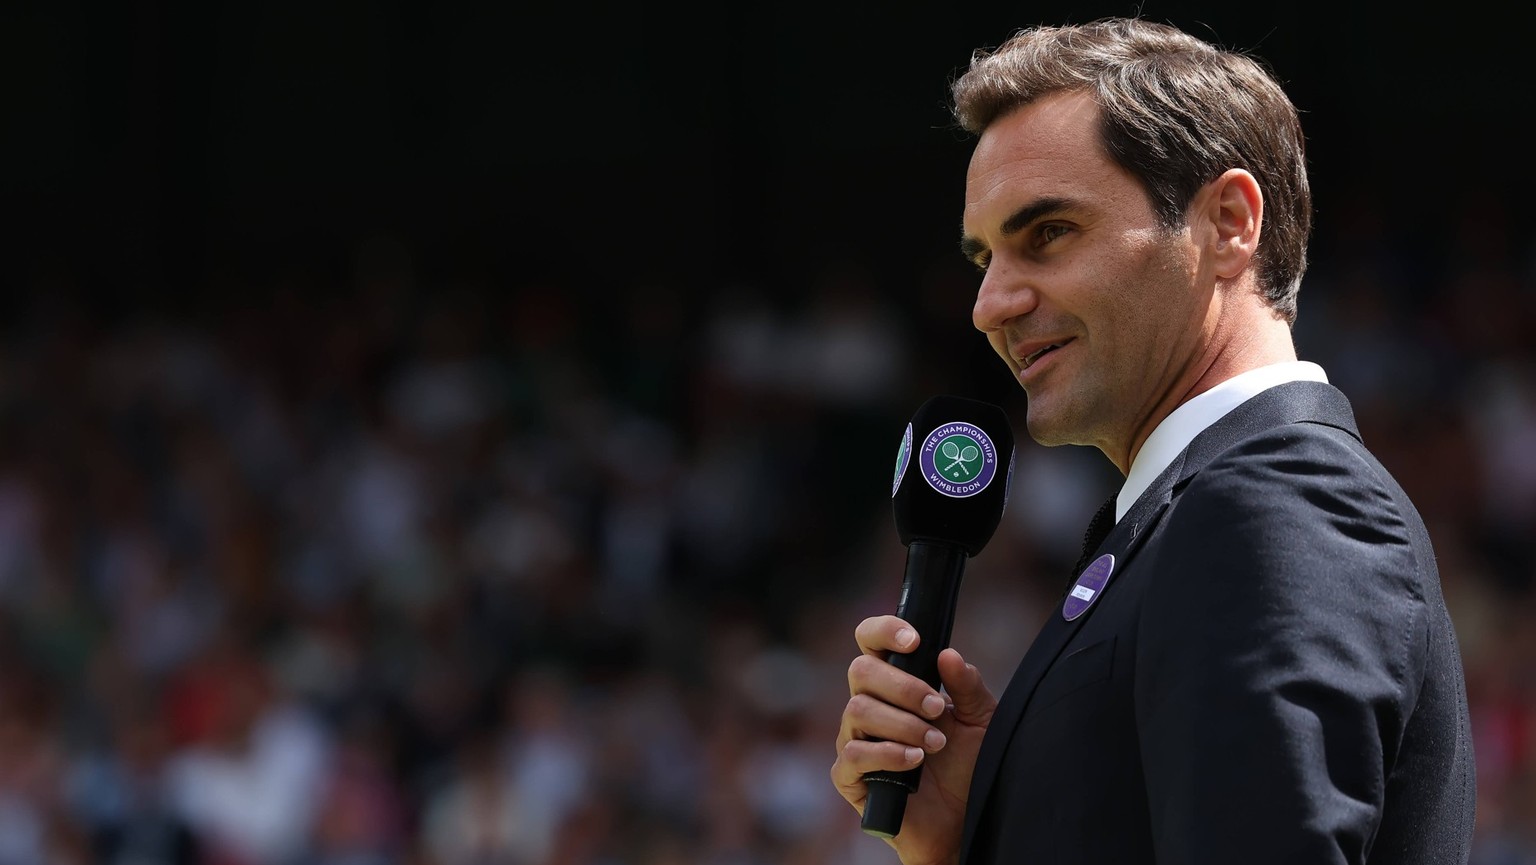 3rd July 2022, All England Lawn Tennis and Croquet Club, London, England Wimbledon Tennis tournament Roger Federer speaks on the microphone at centre court for the 100 year celebration PUBLICATIONxNOT ...